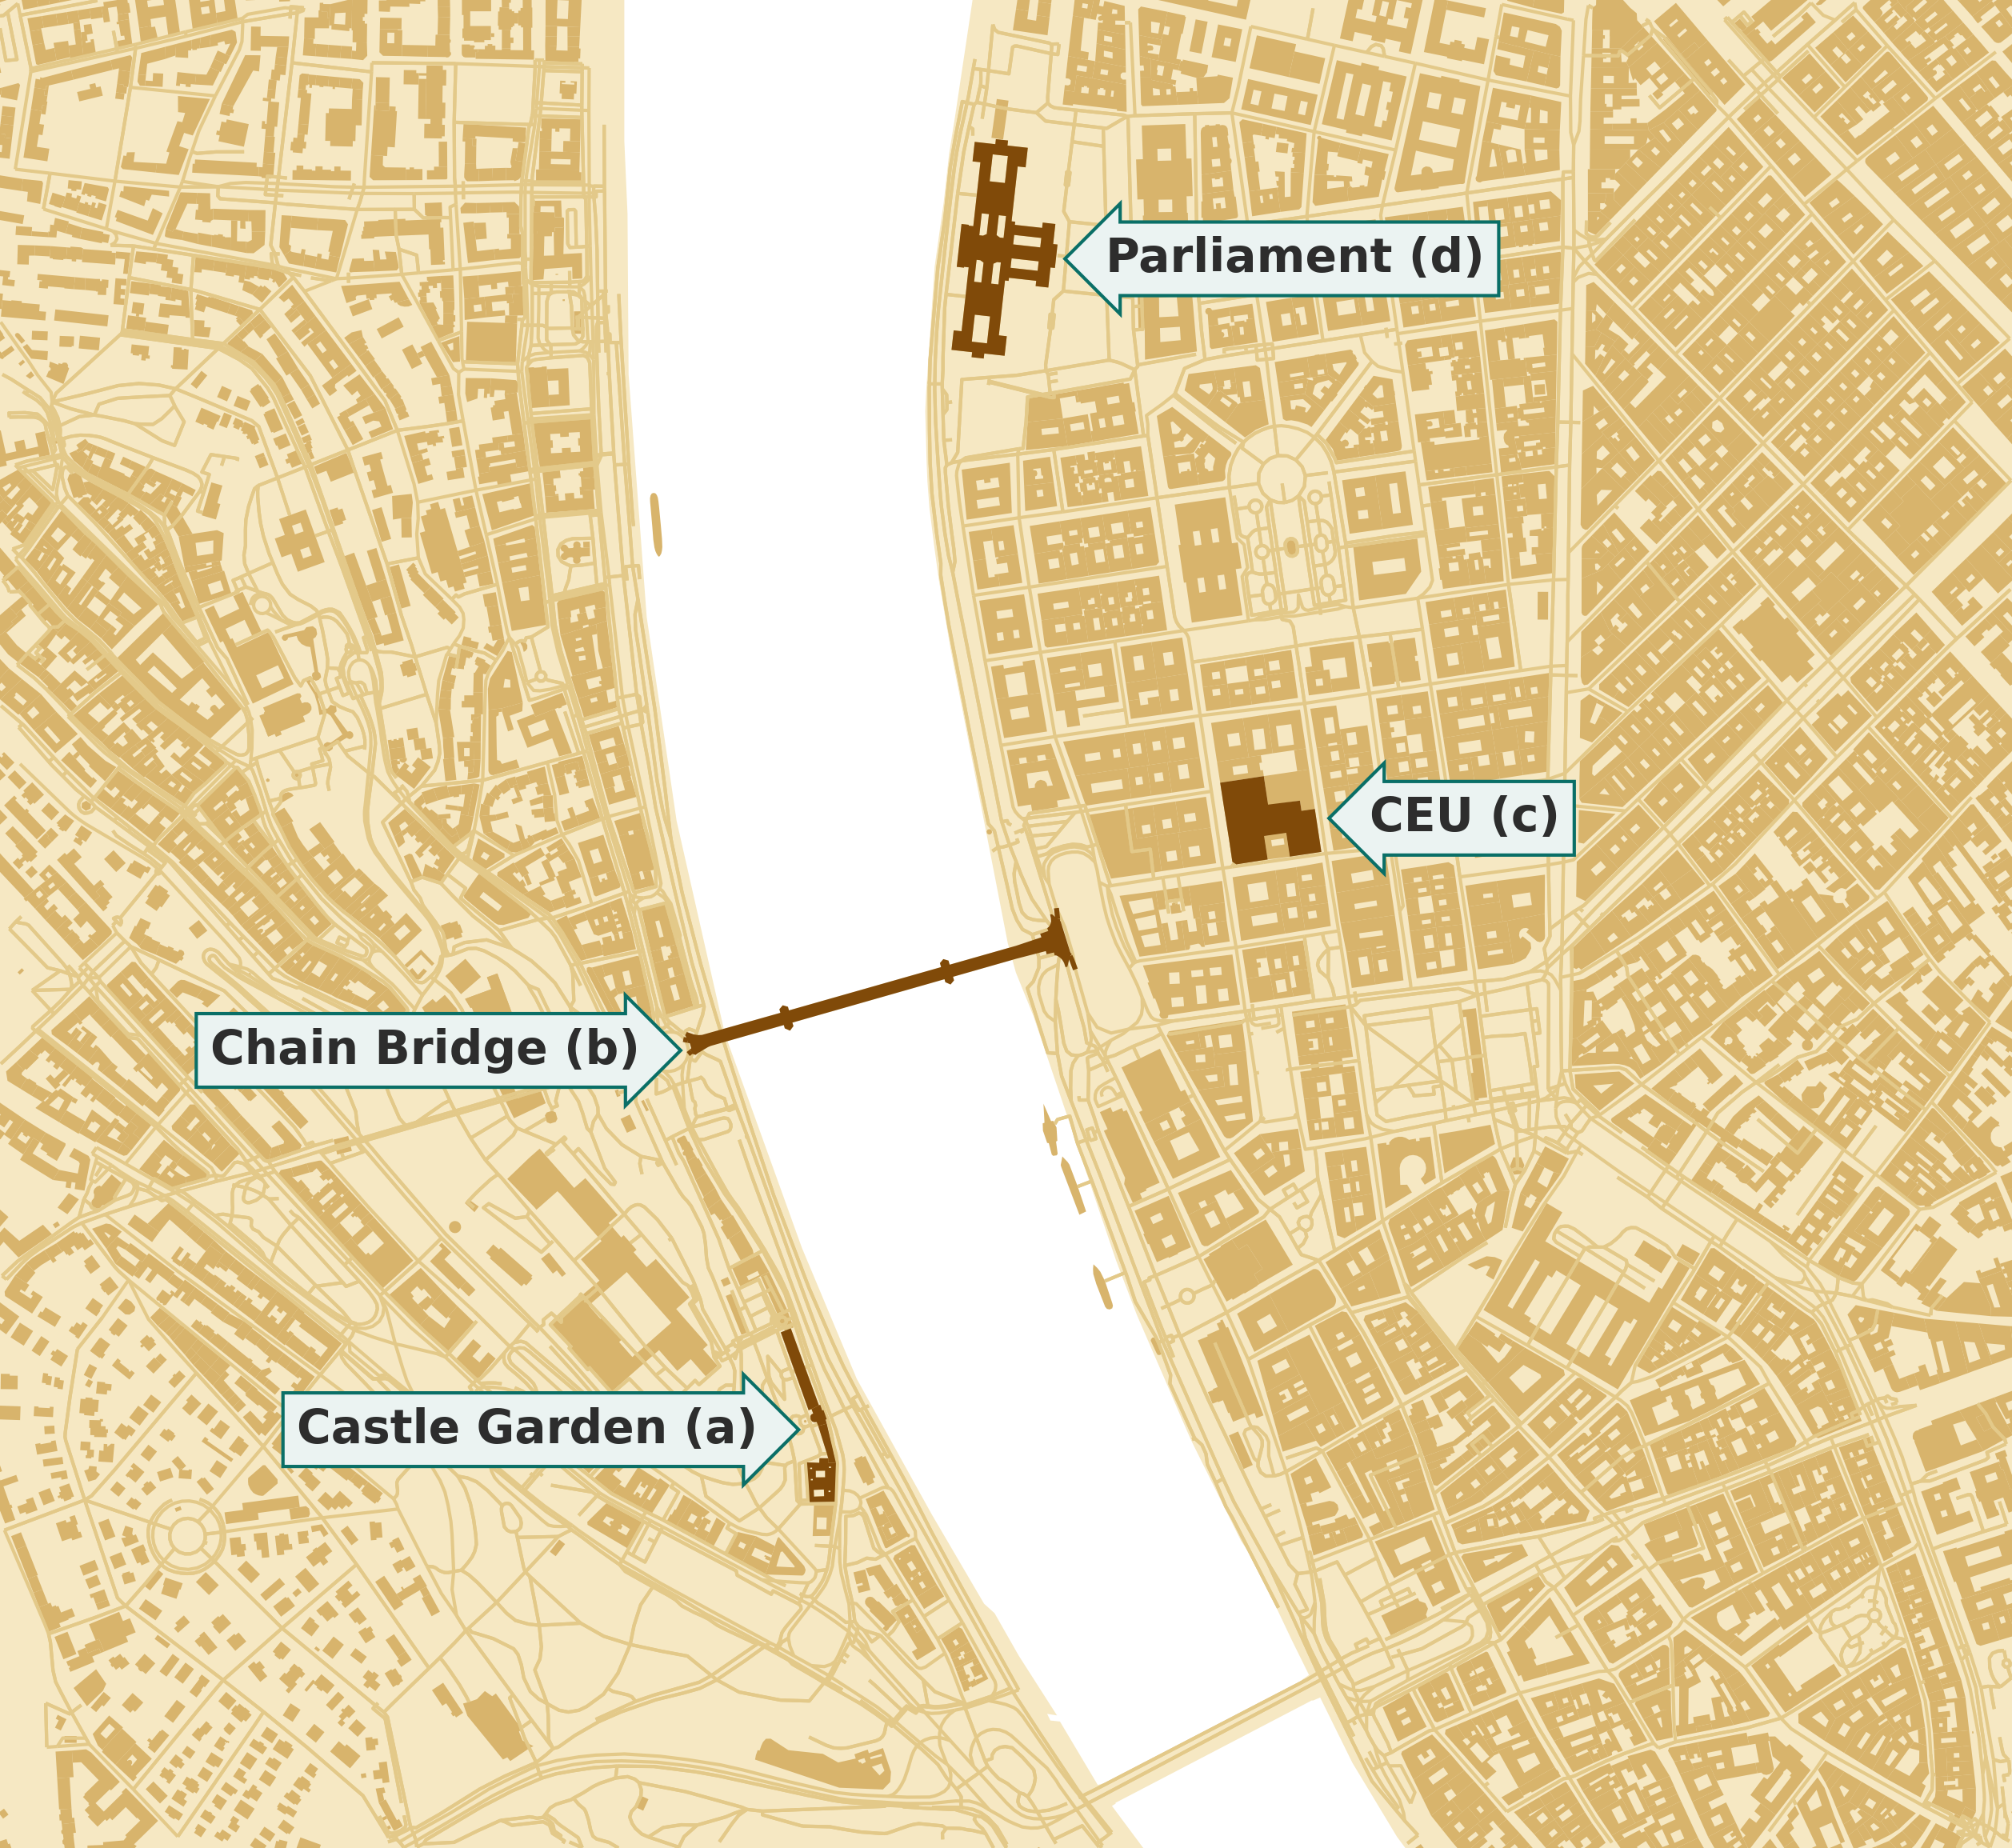 The main locations of the demonstration, that started at the Castle Garden and ended at the Parliament.